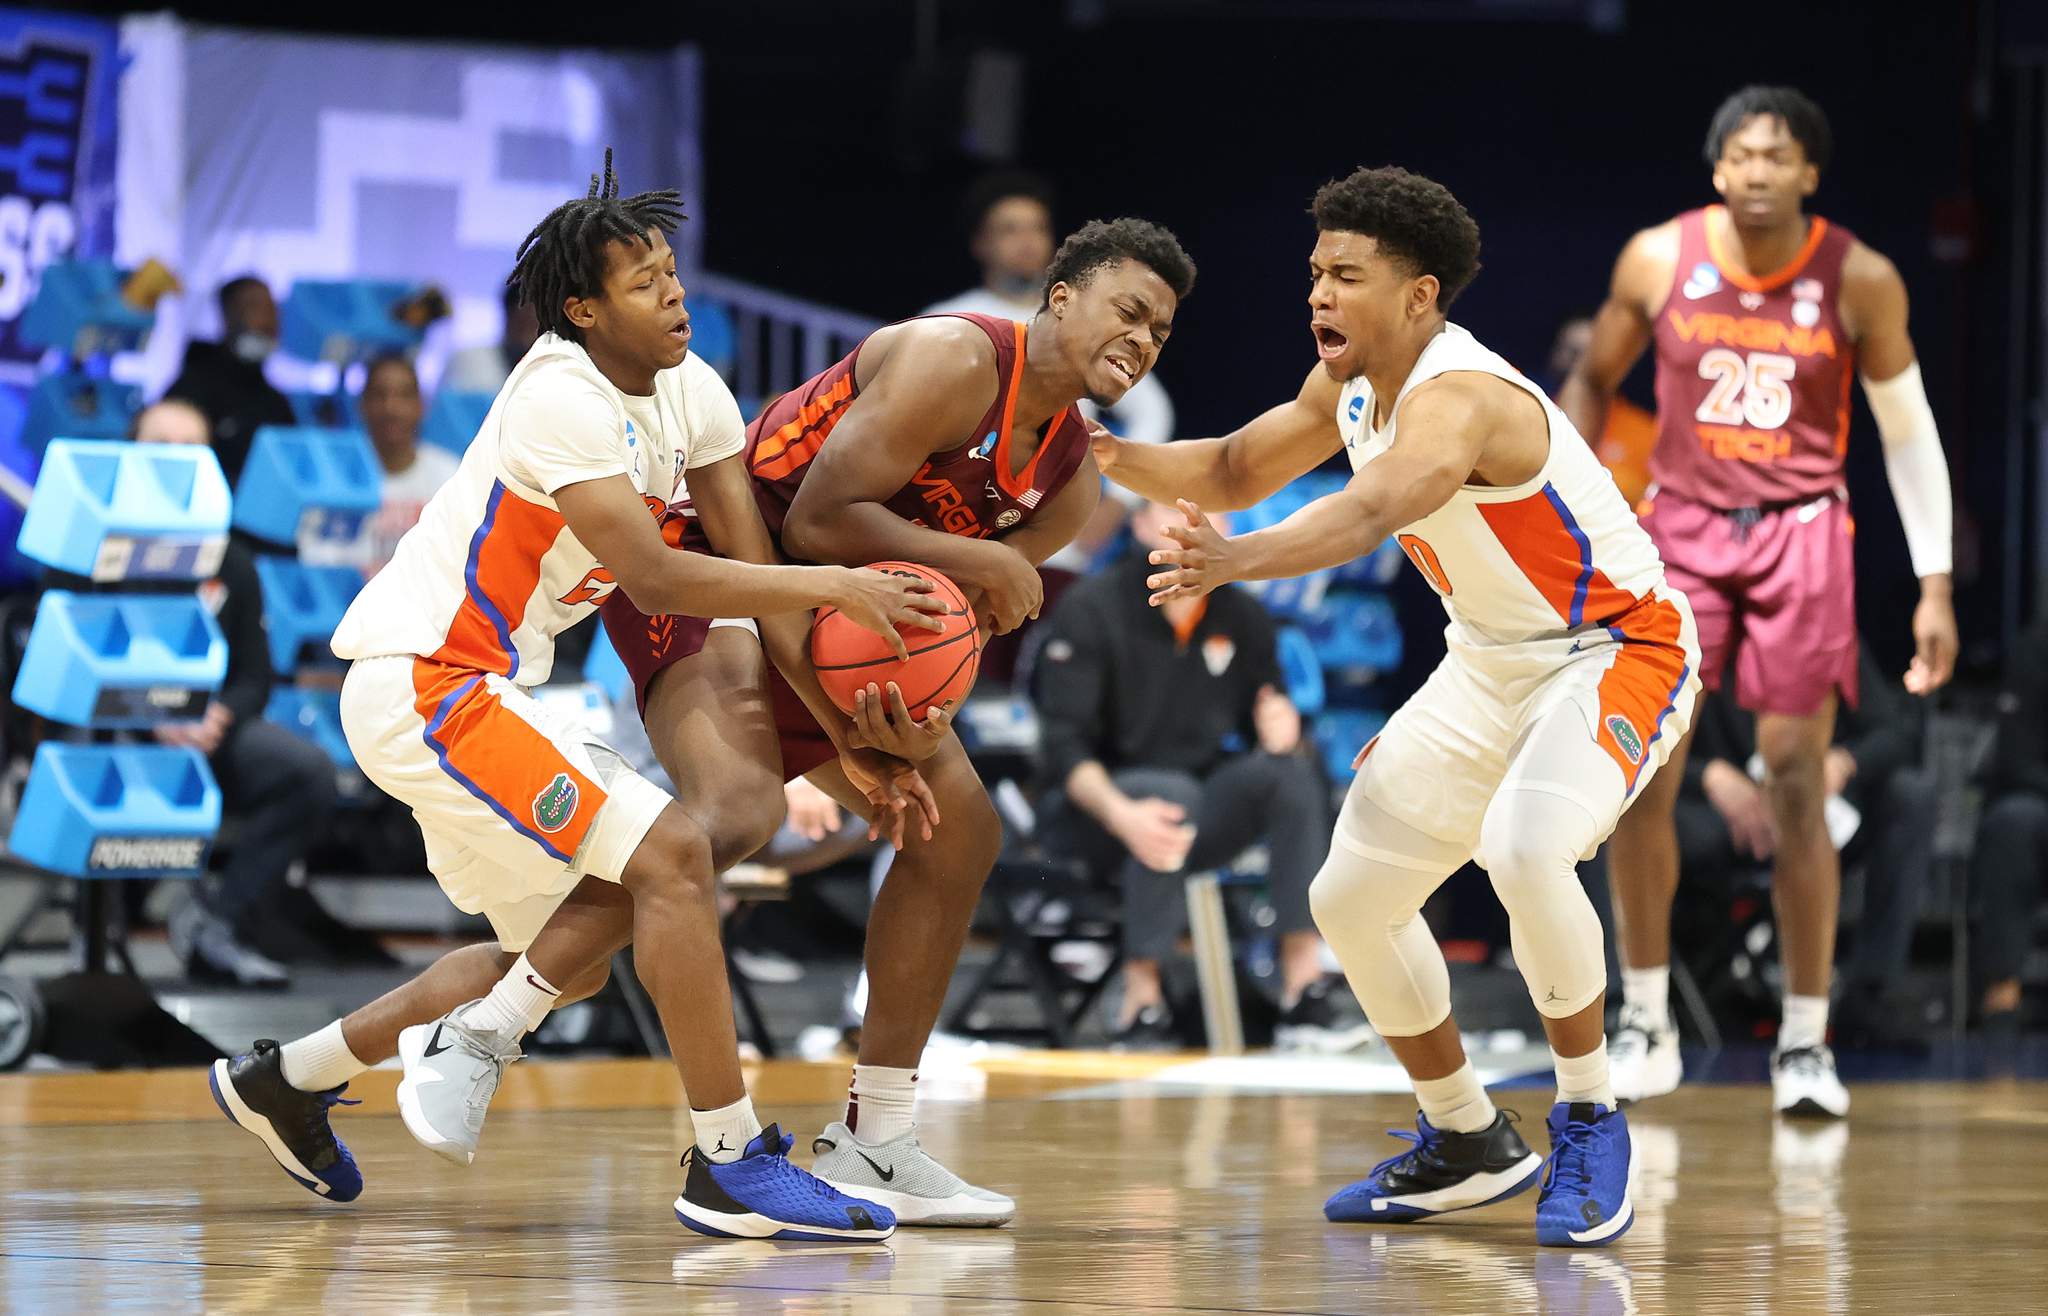 Still dancing: Gators rally late to beat Virginia Tech in tourney opener